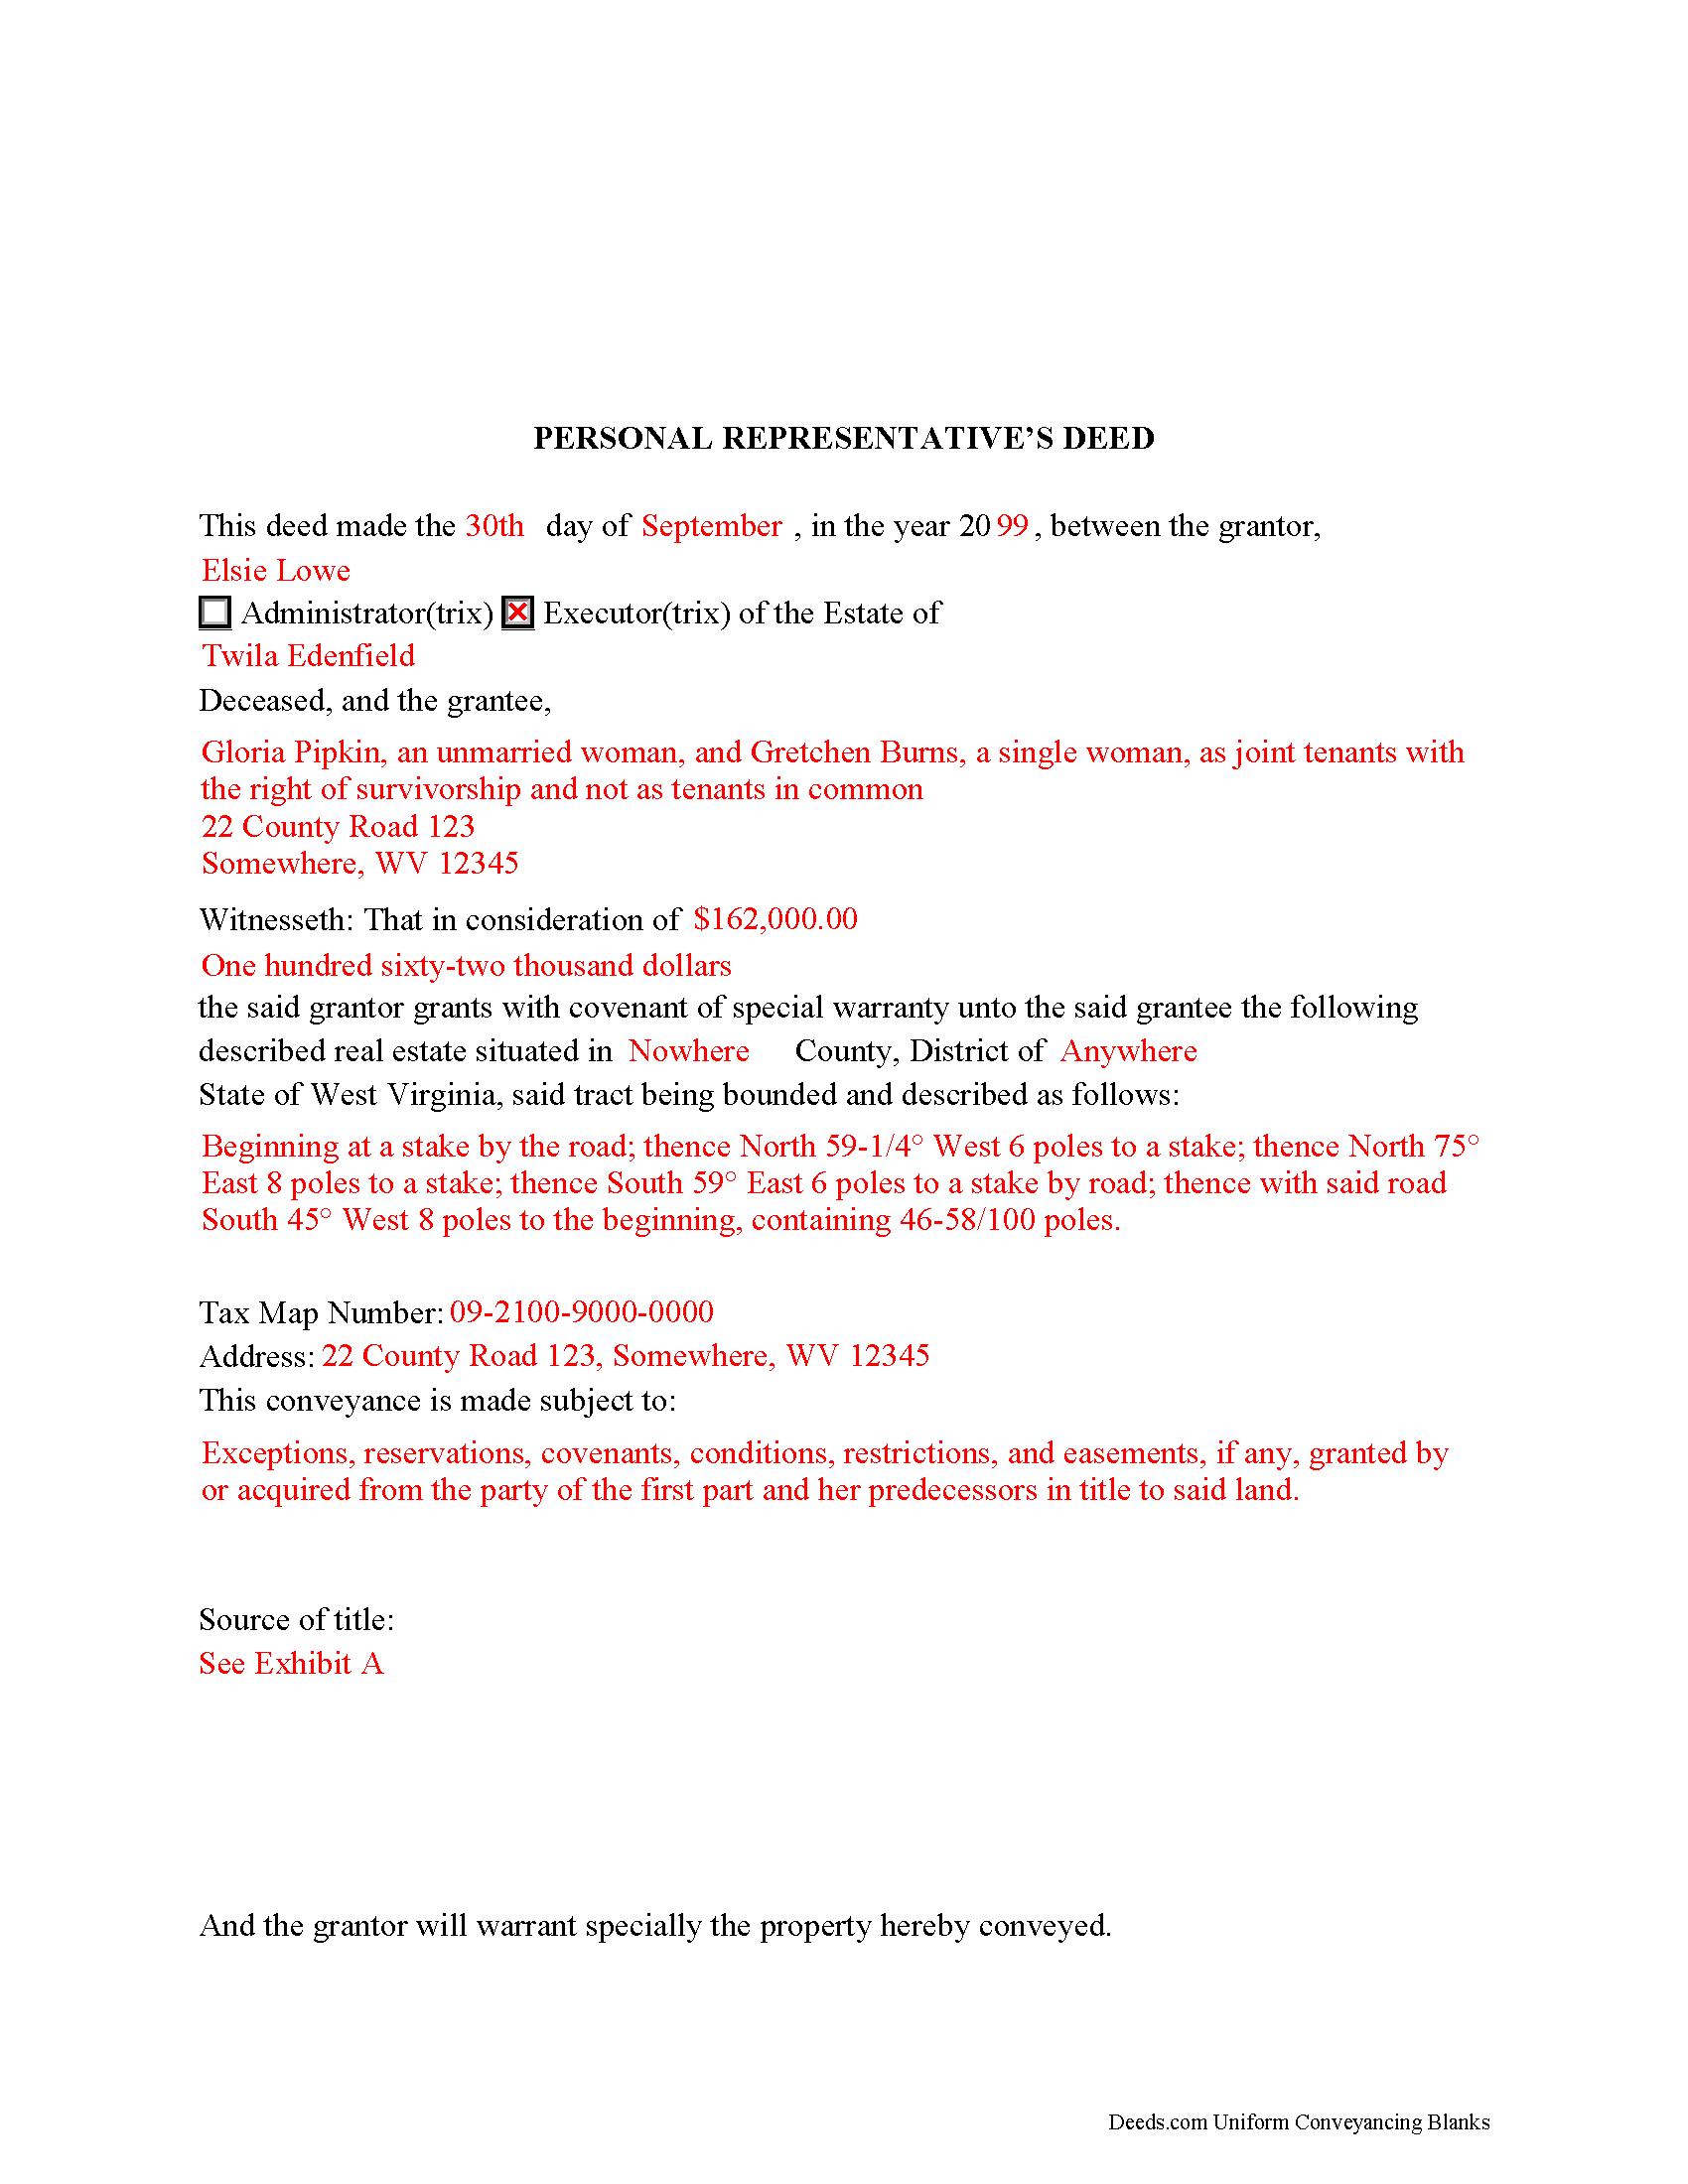 Completed Example of the Personal Representative Deed Document